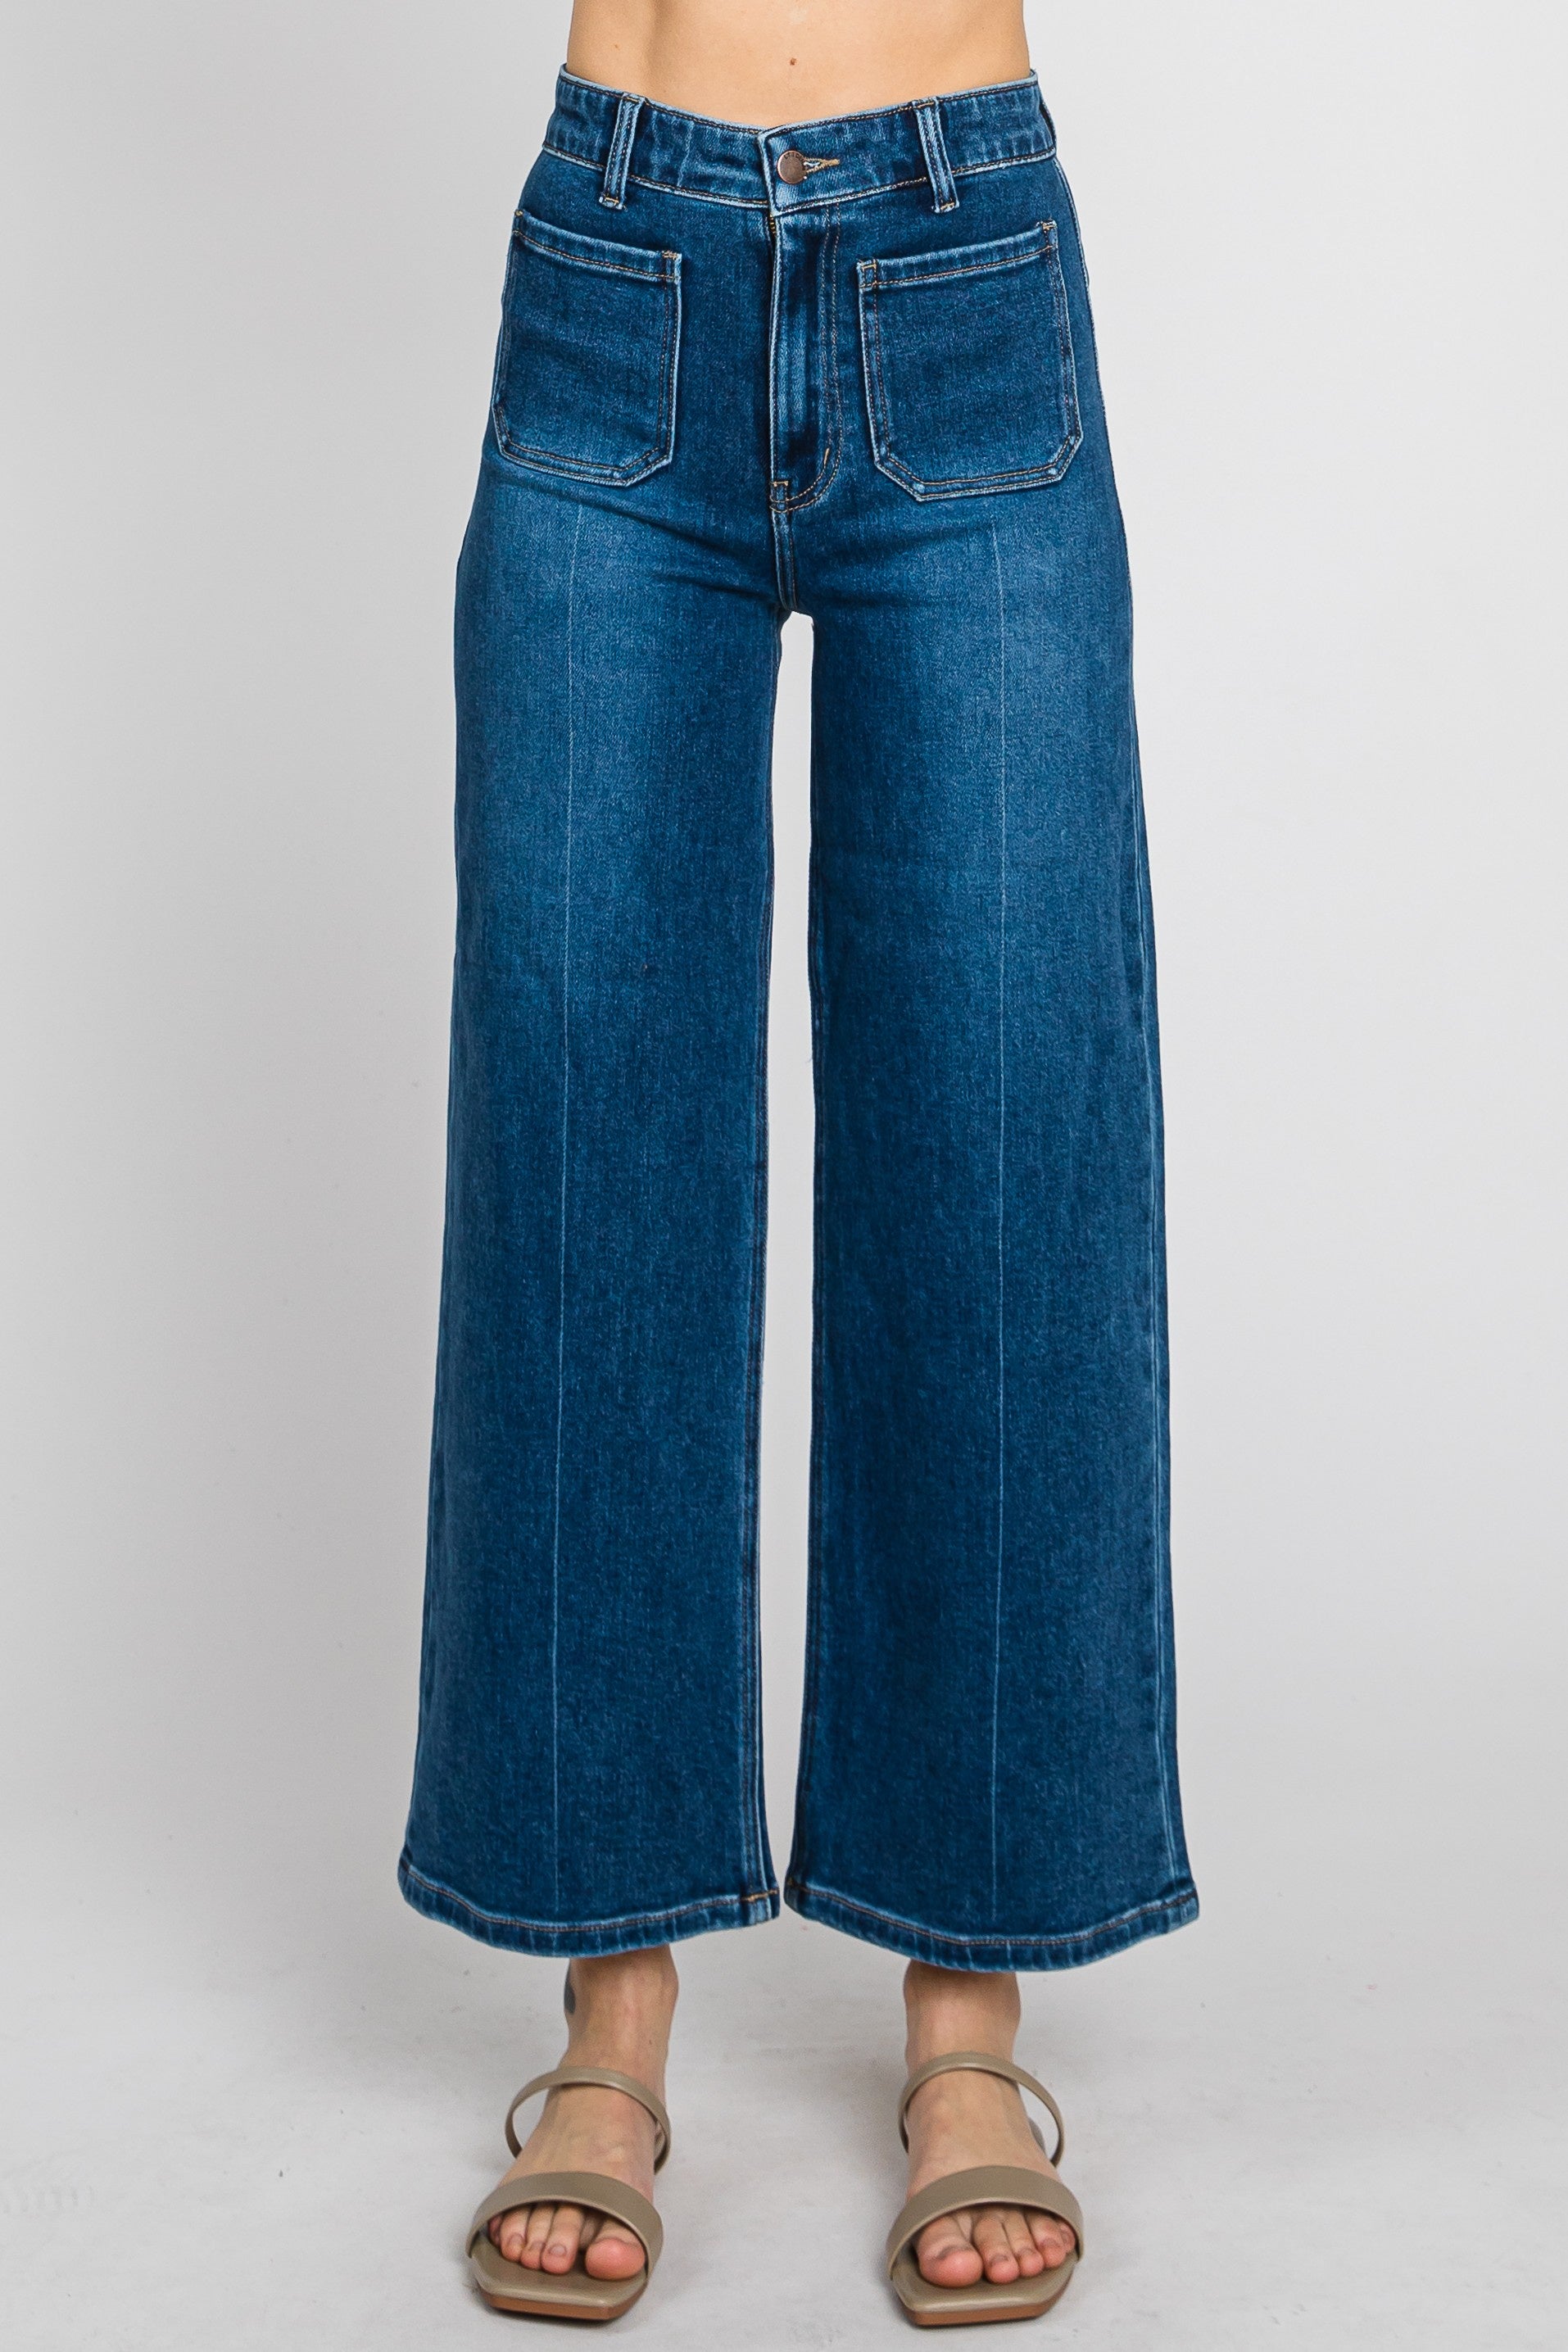 The Cara Patch Pocket Wide Leg Jeans by L.T.J